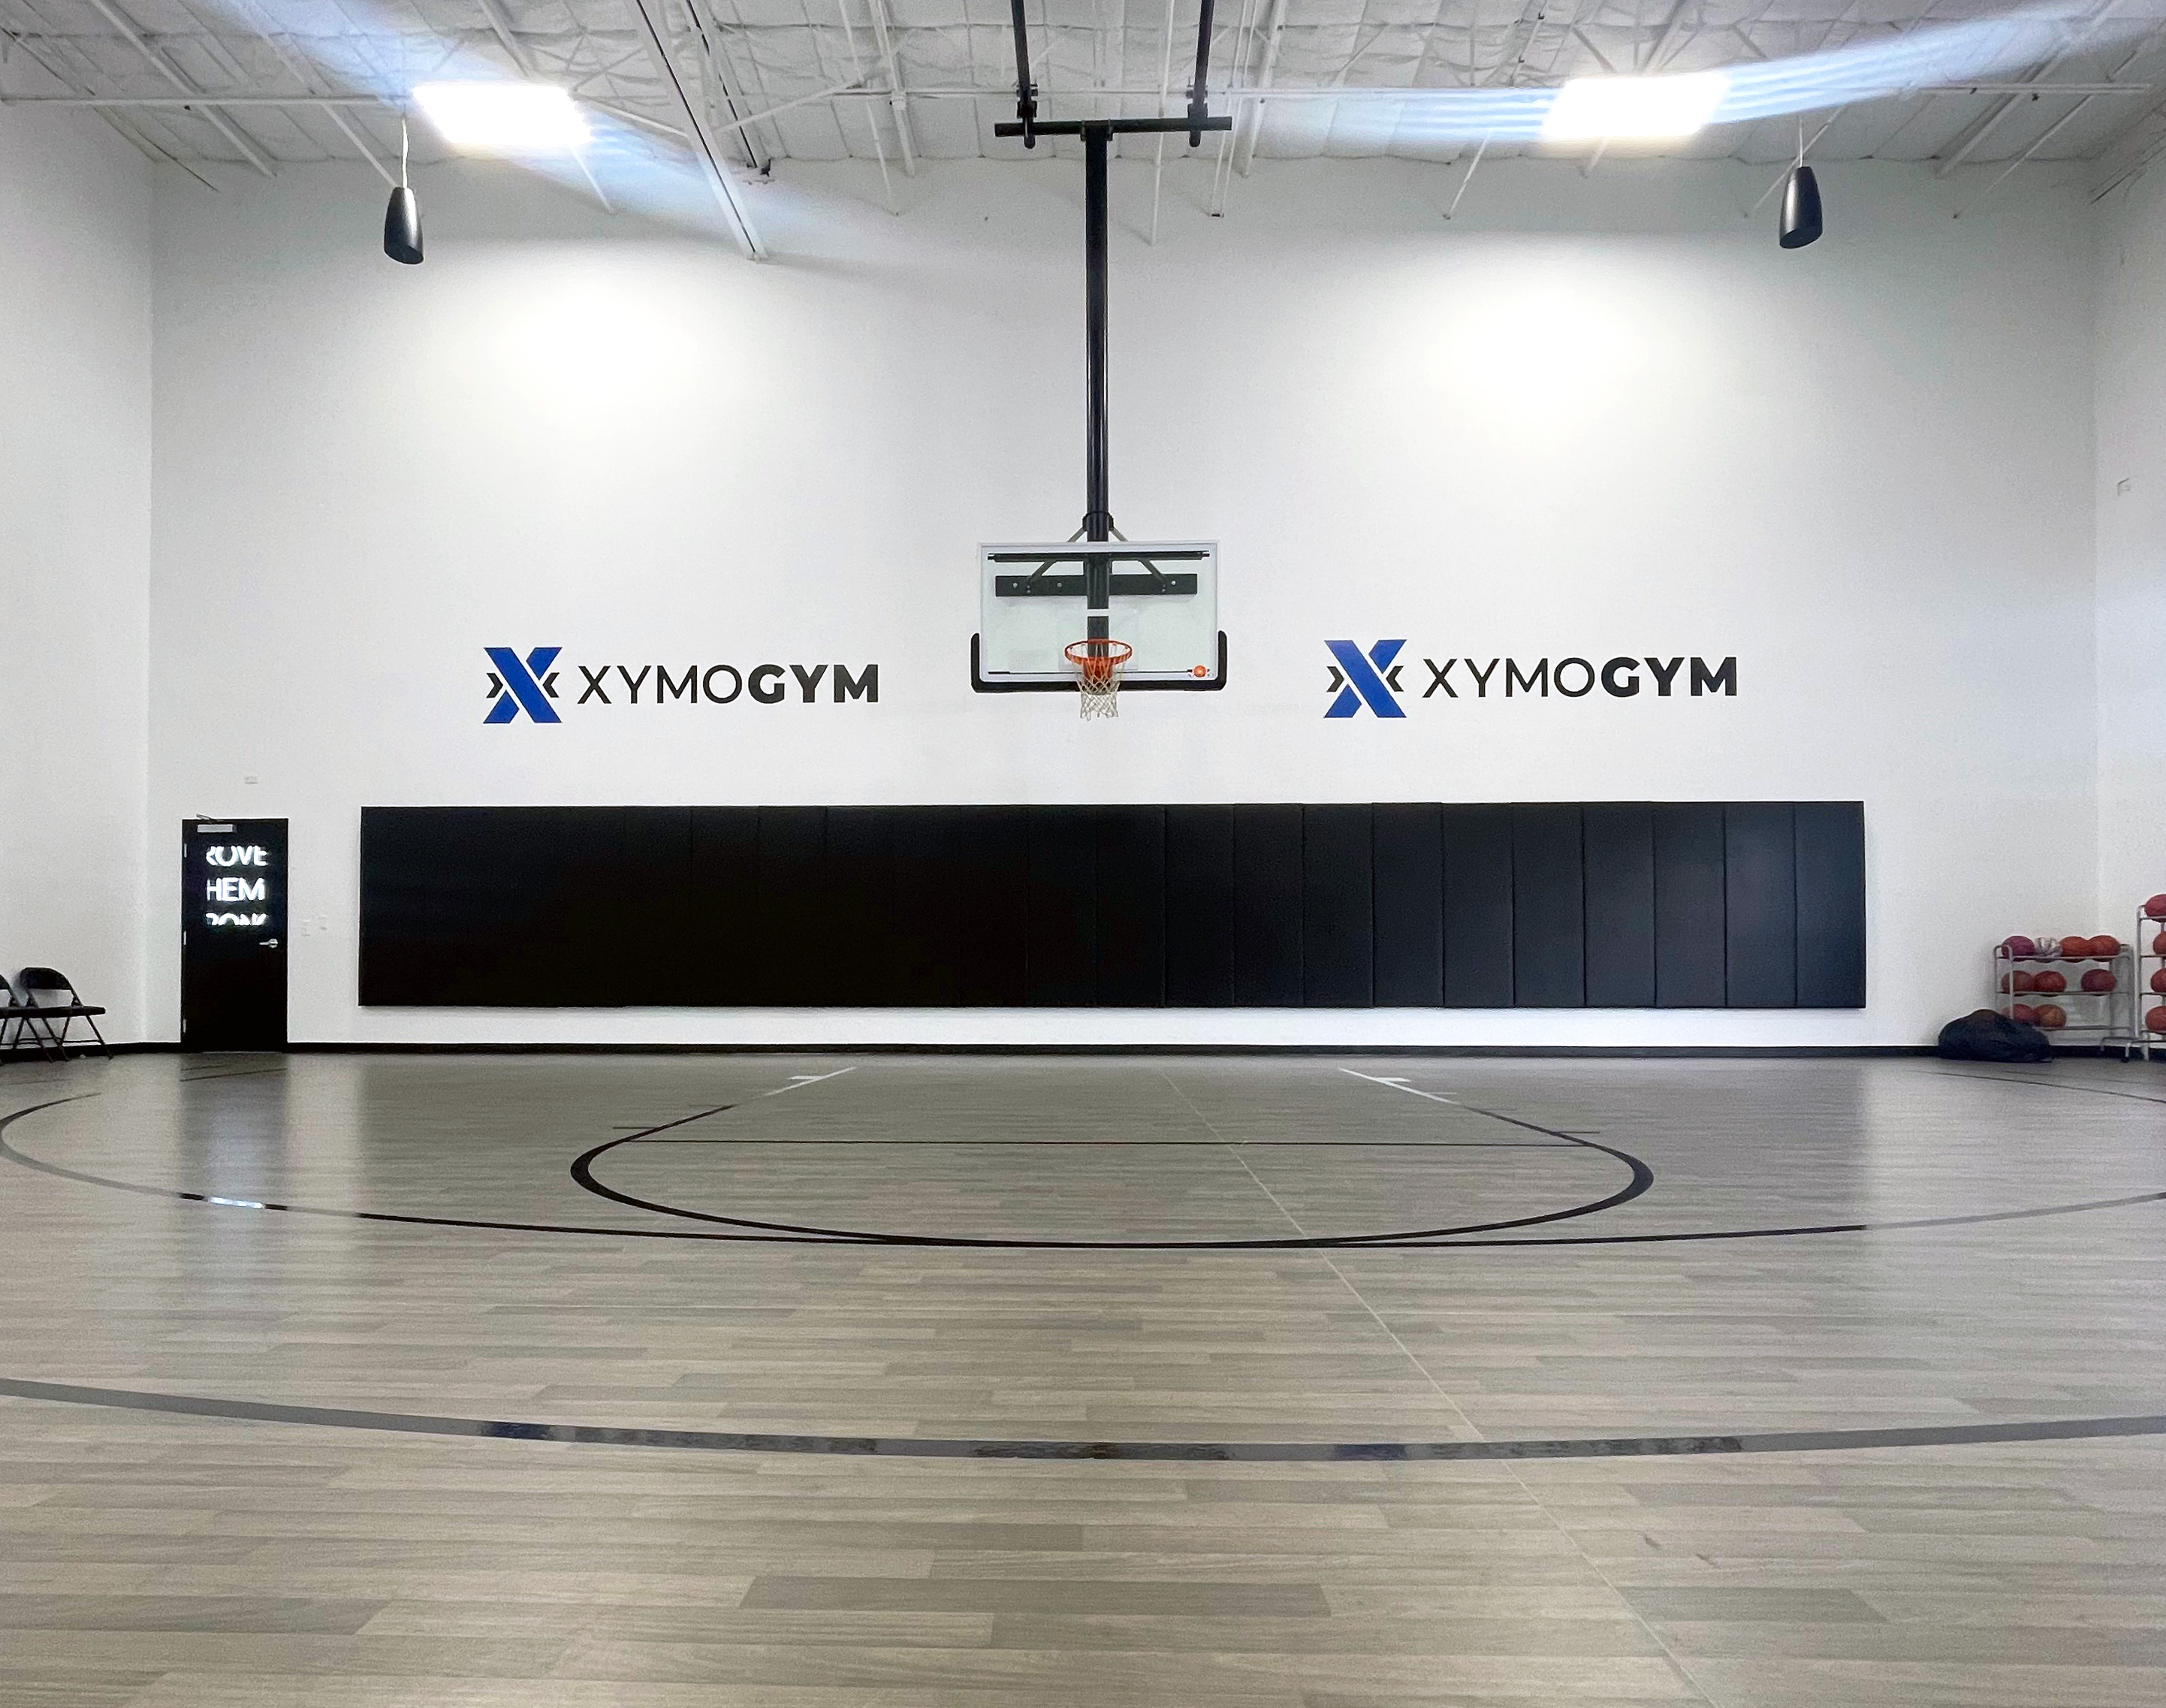 The basketball court at XYMOGYM